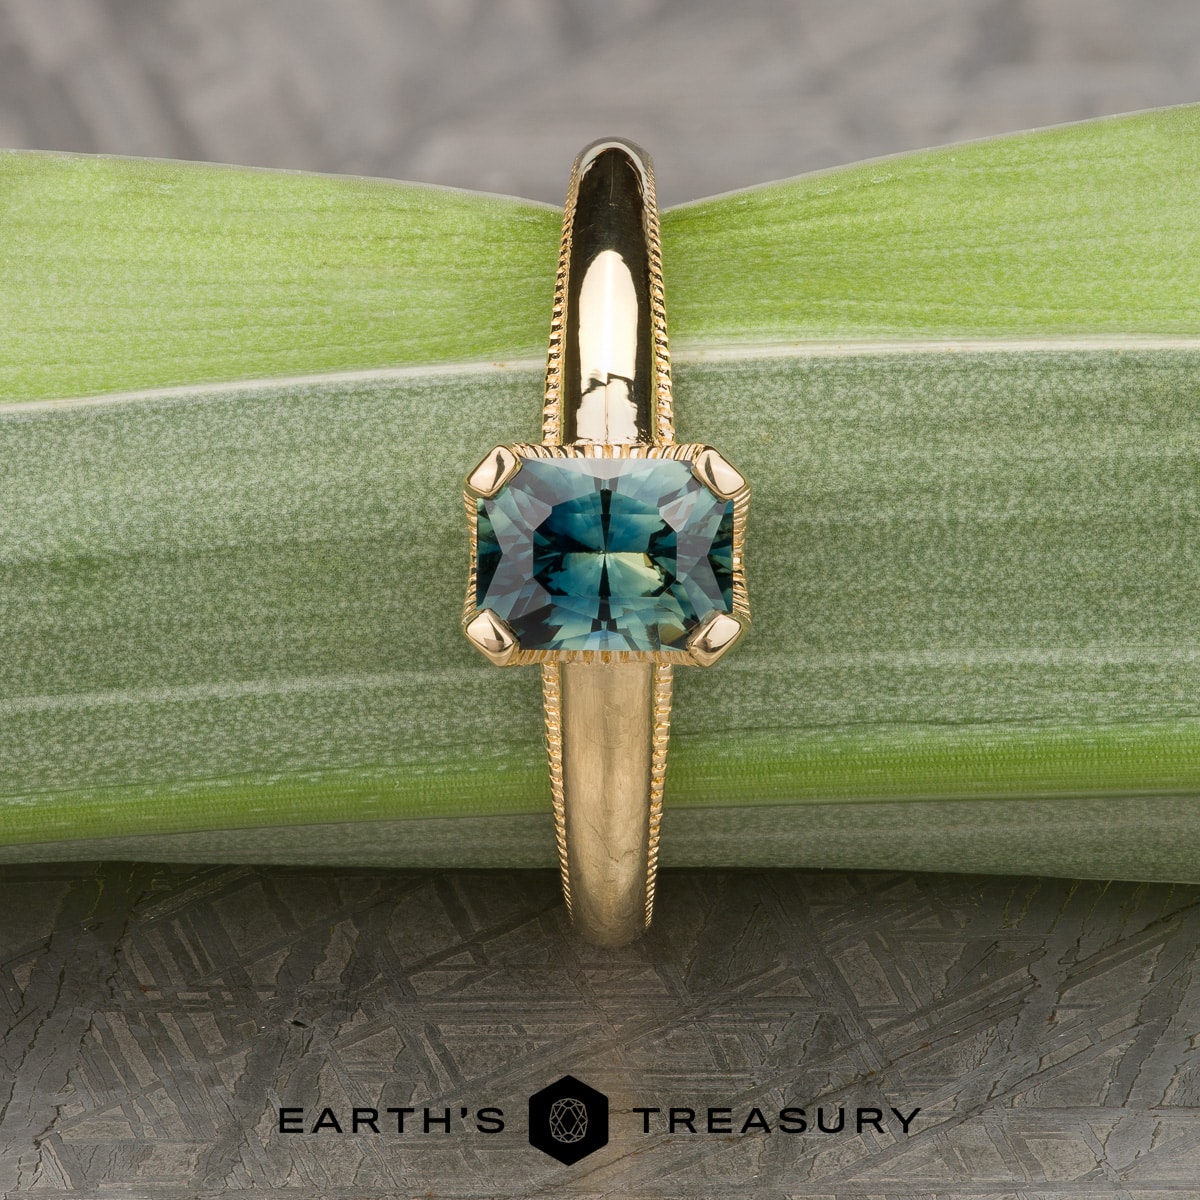 The "Narcissus" in 18k yellow gold with 1.27-carat Australian sapphire